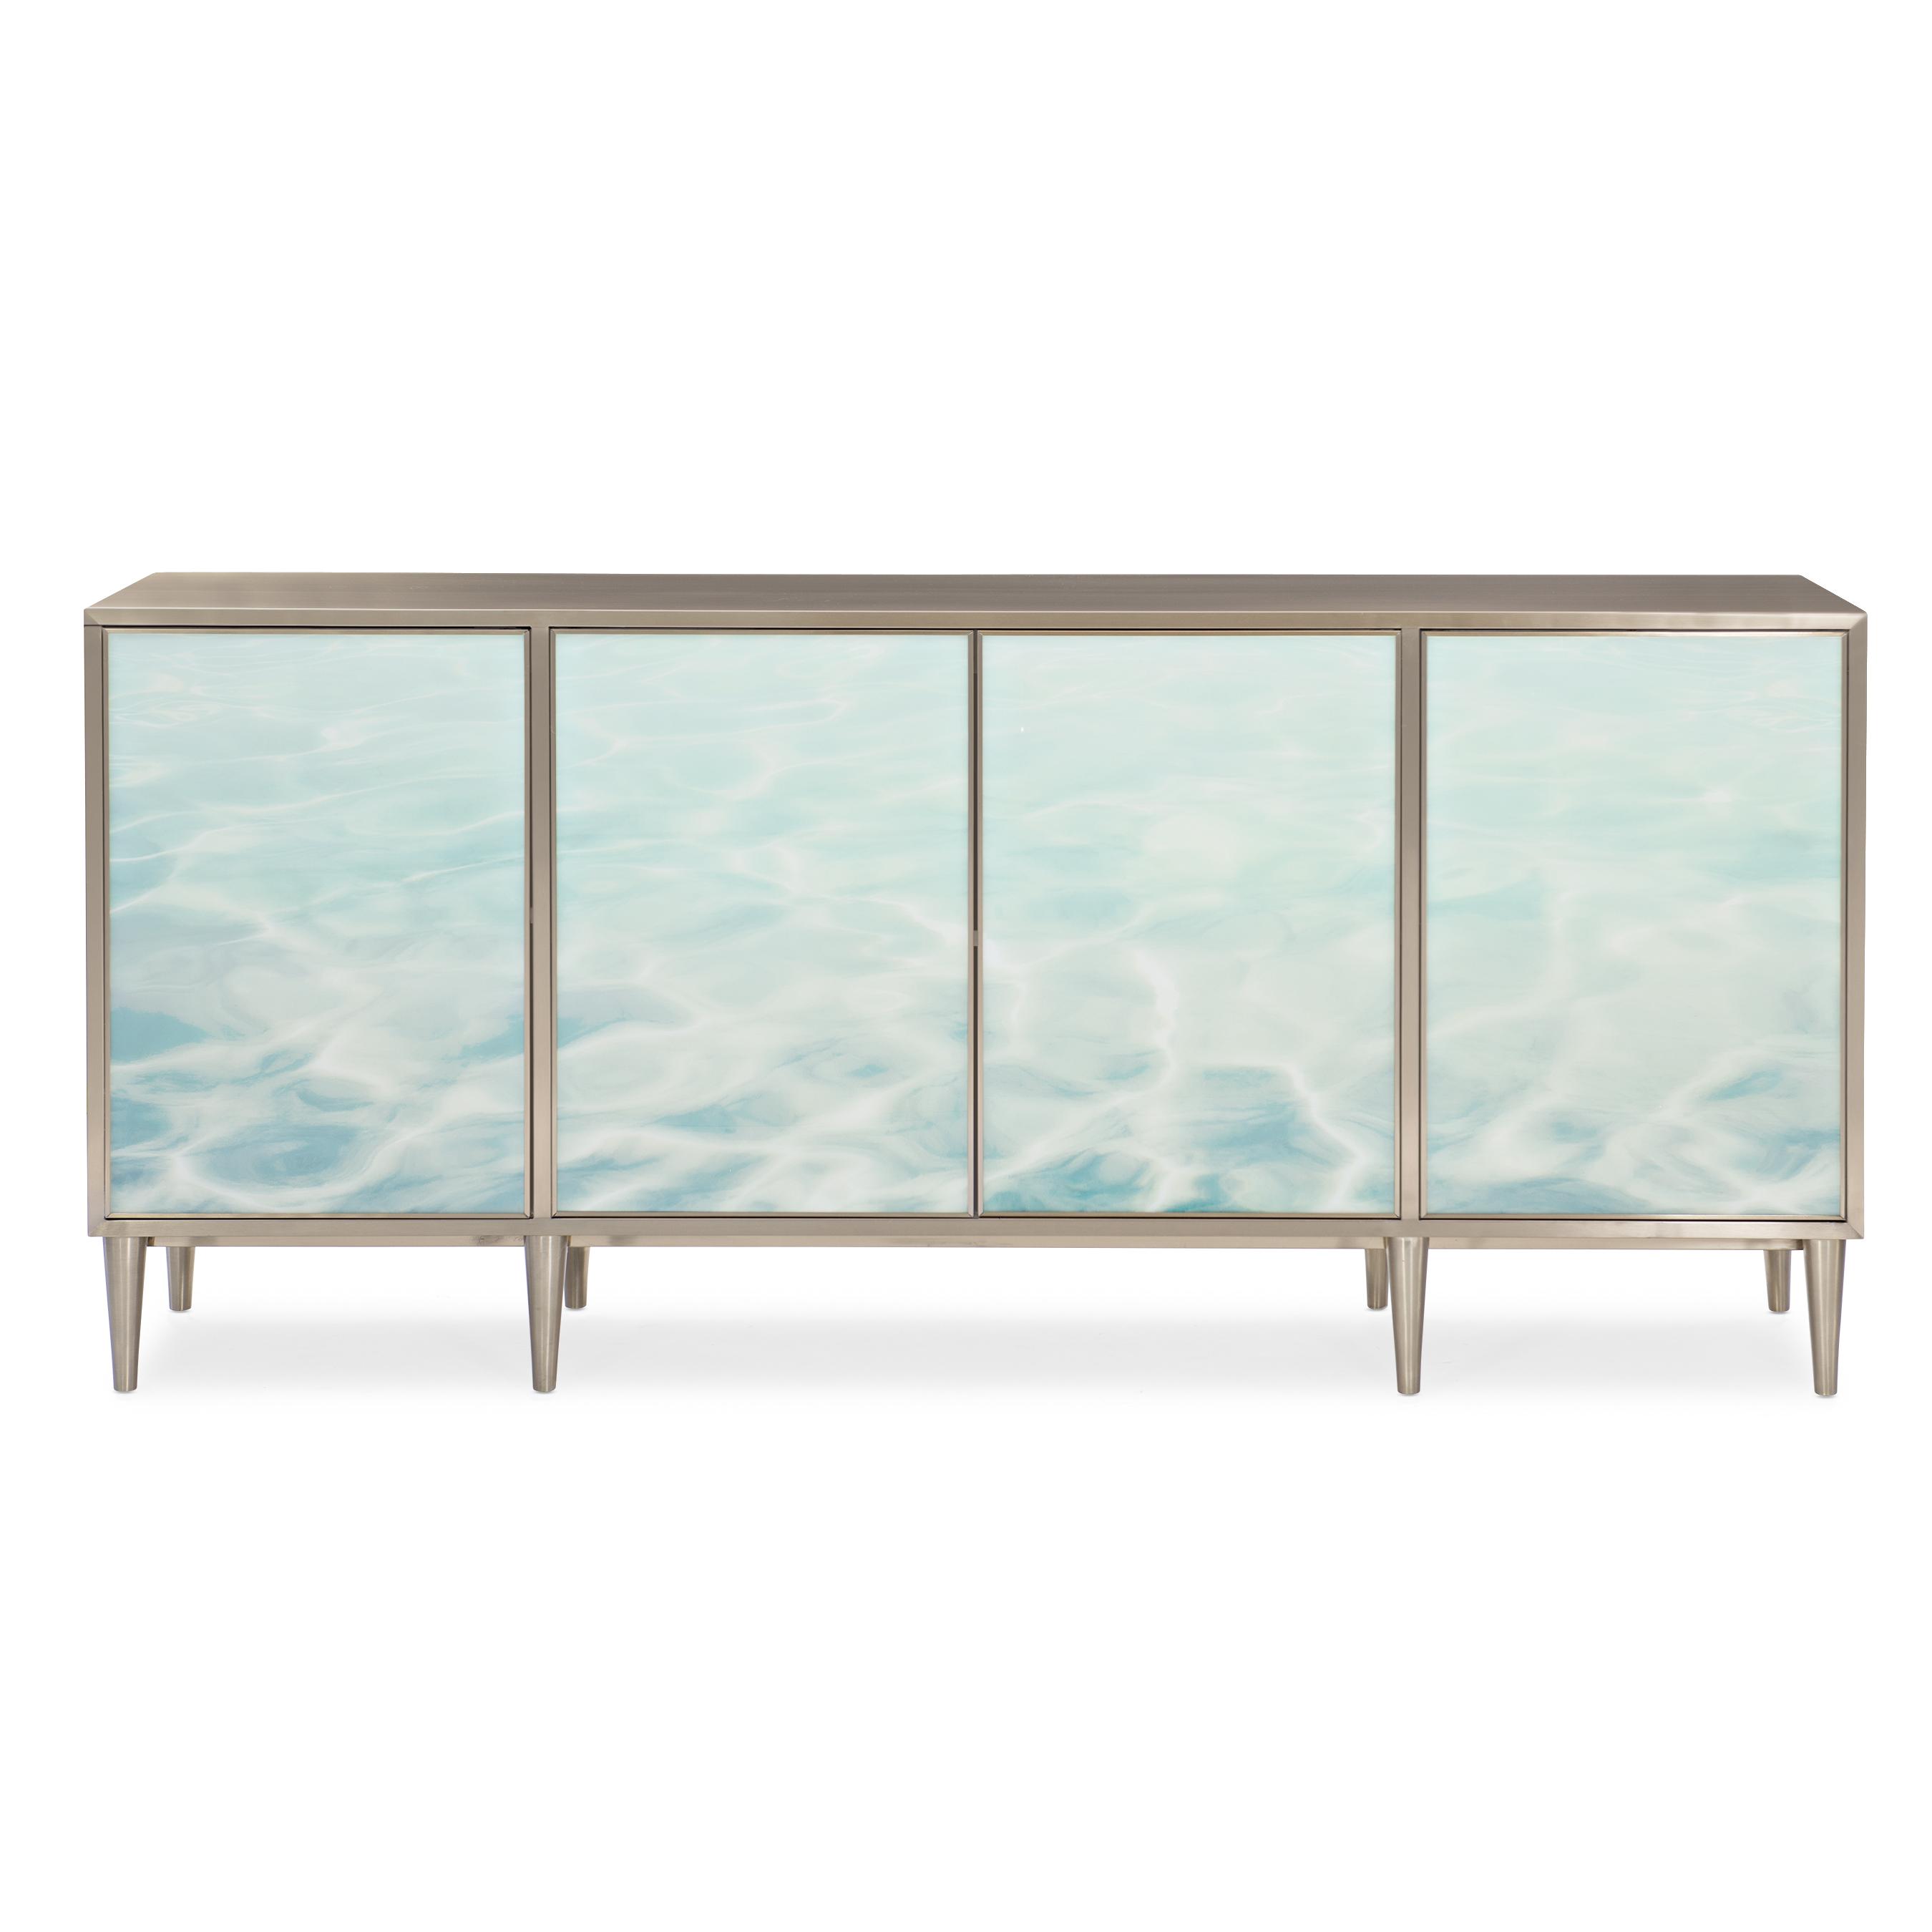 

    
Sea-Inspired Blue Velvet Queen Platform Bedroom Set 5Pcs DO NOT DISTURB / GIVE IT A REED by Caracole
